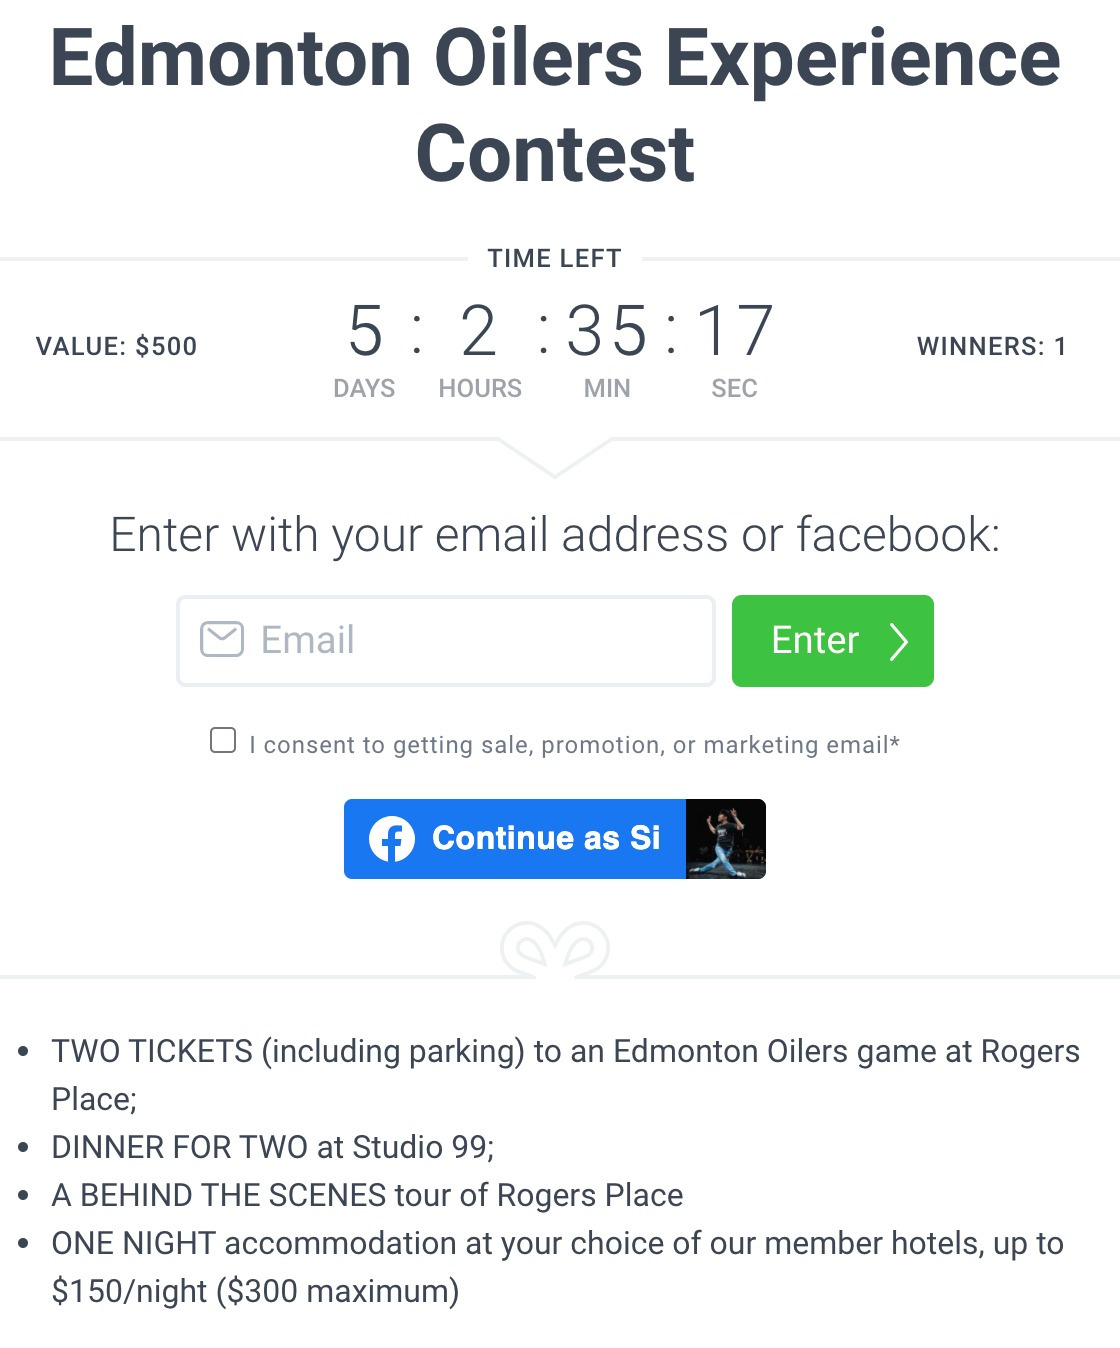 Contest page showing prize details and text field for participants to enter email address/FB details